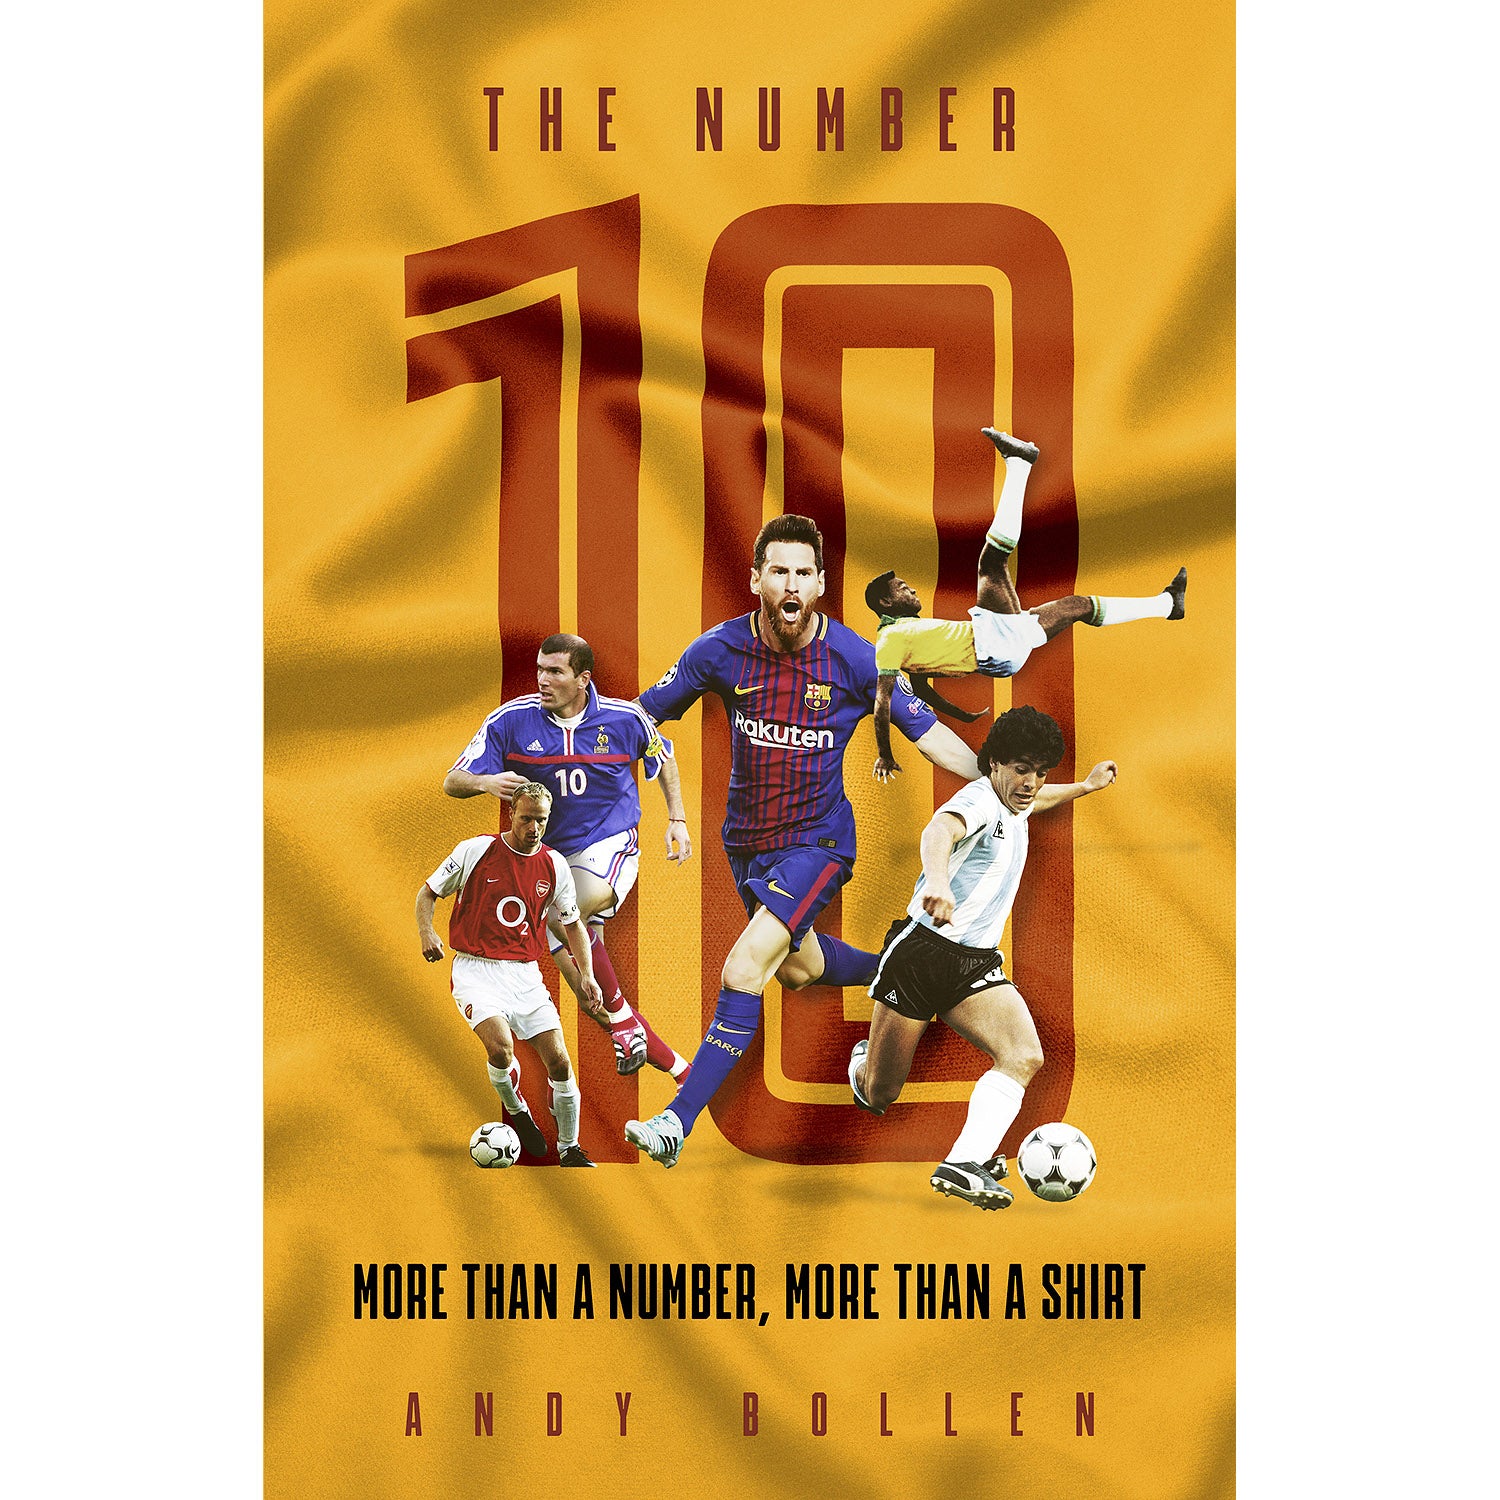 The Number 10 – More than a Number, More than a Shirt